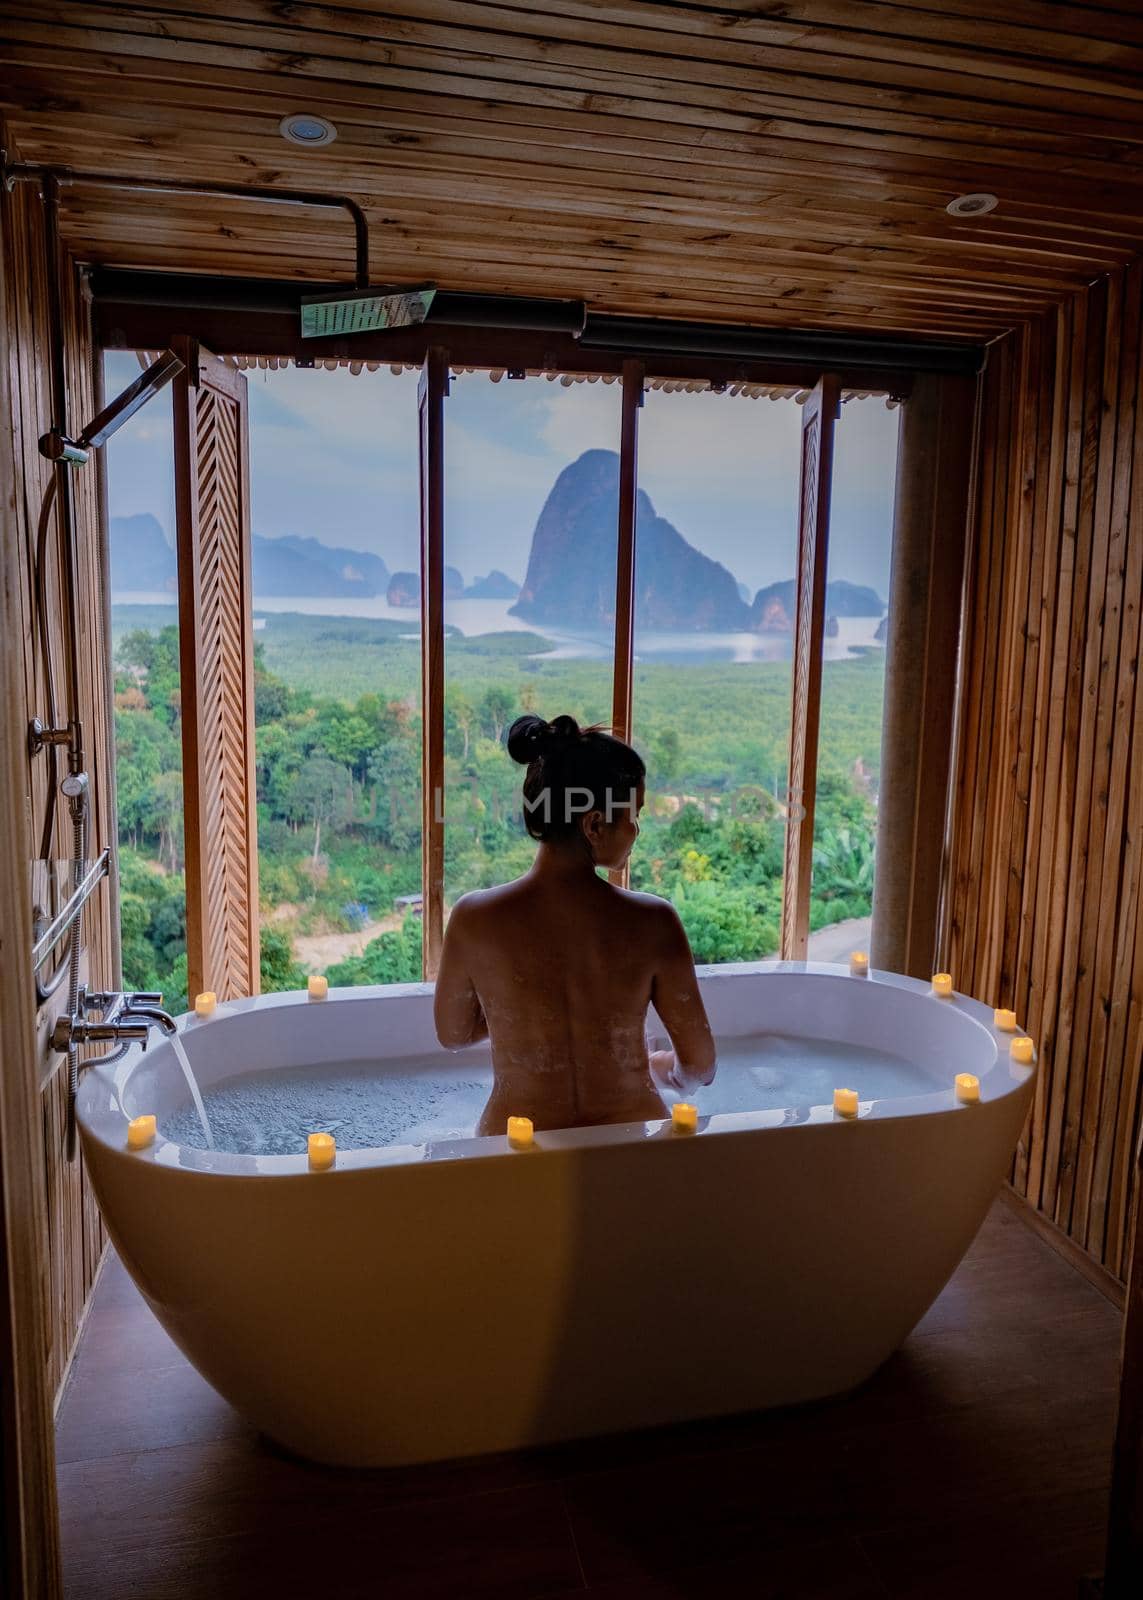 woman in bath tub looking out window of bathroom, asian woman mid age,Romantic moments in the bathroom on vacation at Phangga Thailand by fokkebok